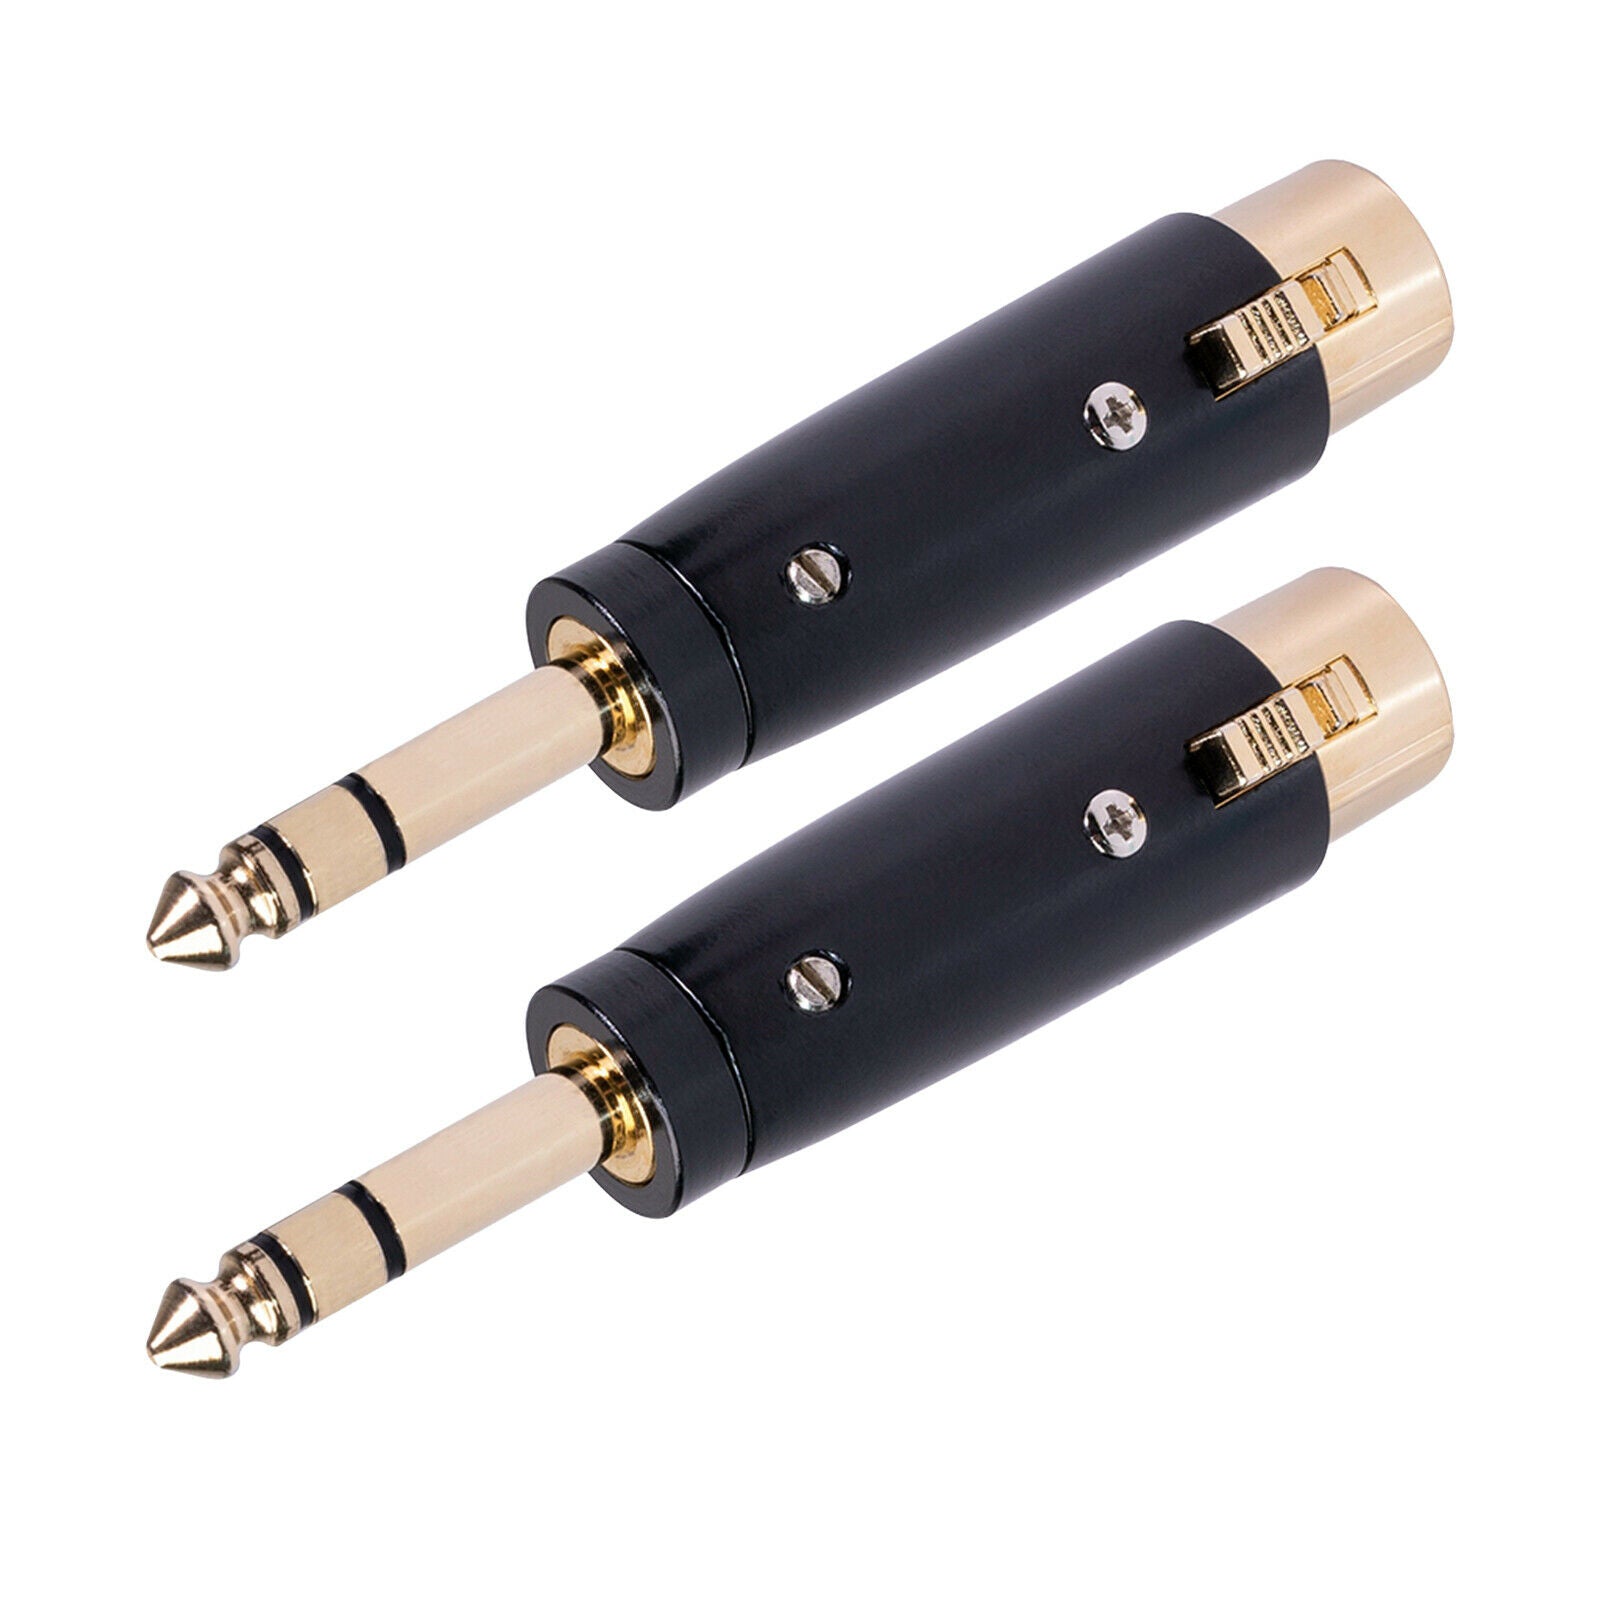 2x TRS Socket Stereo Audio Mic Audio Cable Cord Adapter Converter Connector